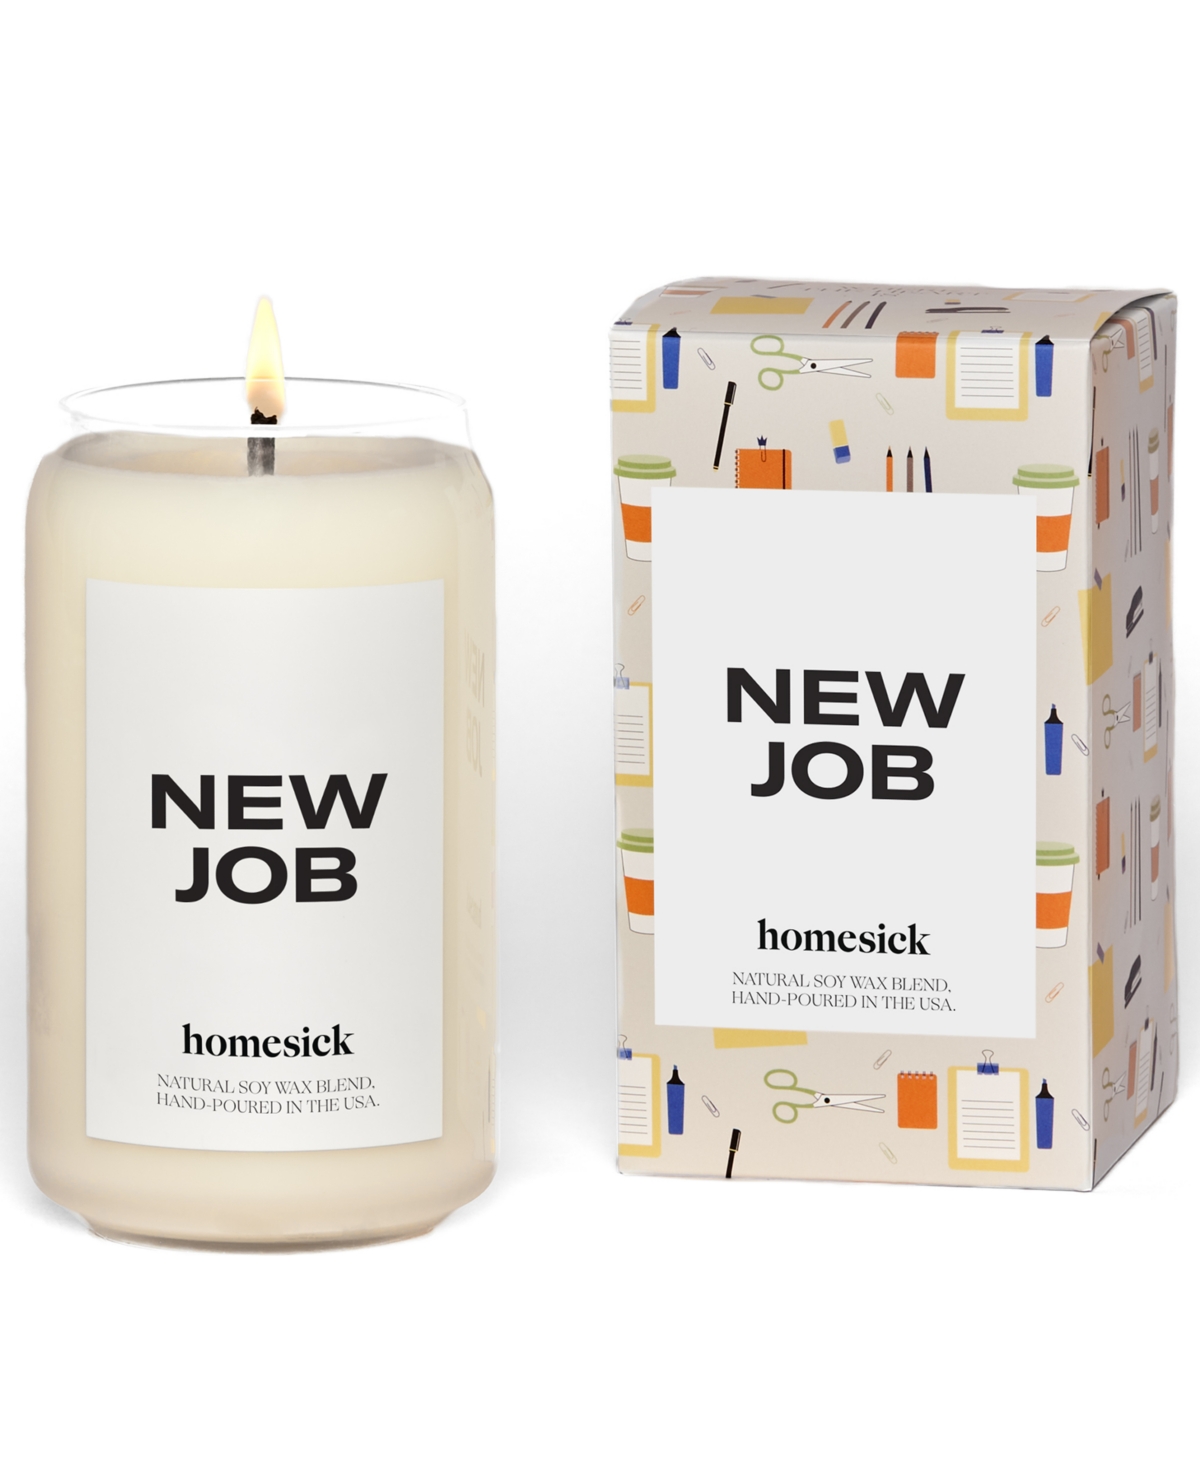 'New Job' Candle, Cinnamon & Leather Scent, 13.75-oz. - Natural